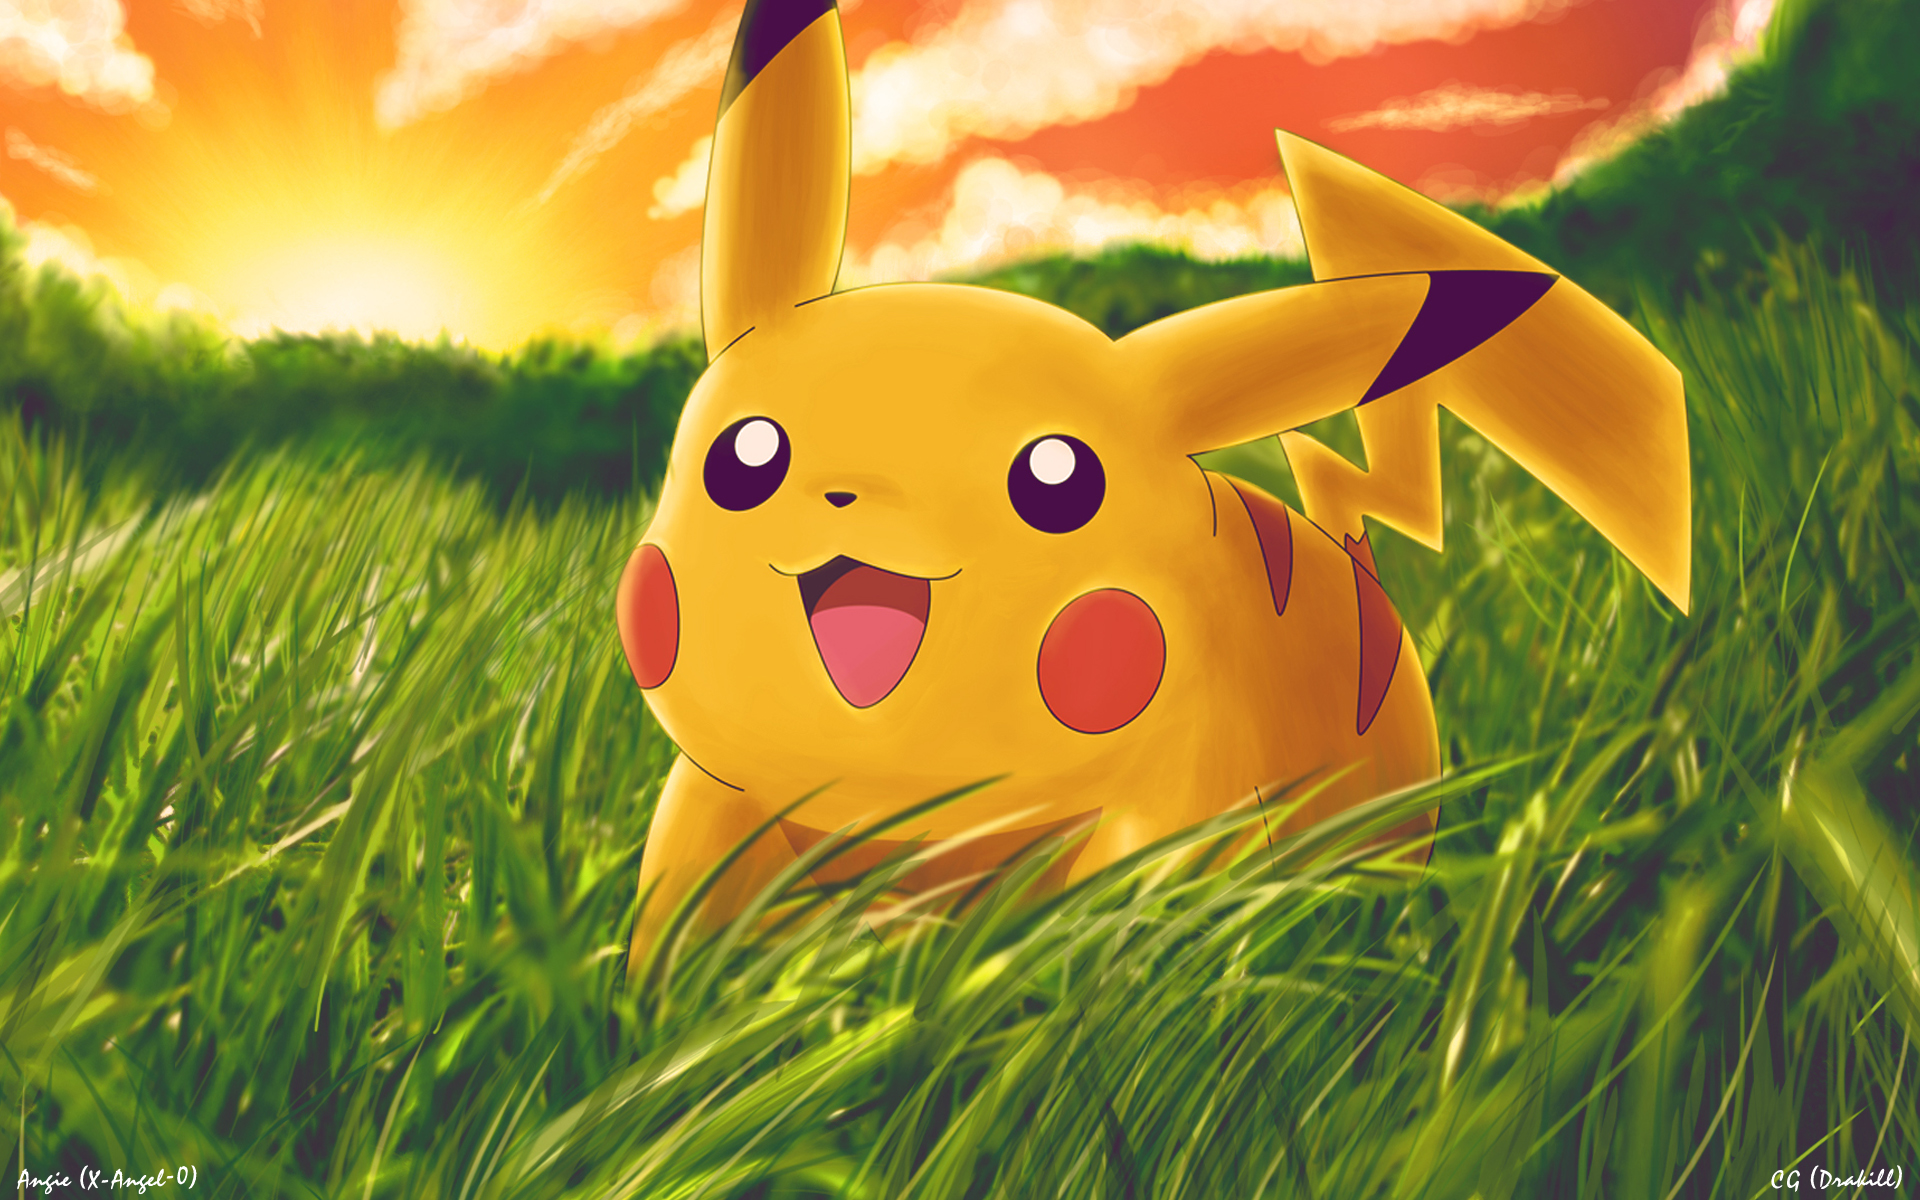 4200+ Pokémon HD Wallpapers and Backgrounds